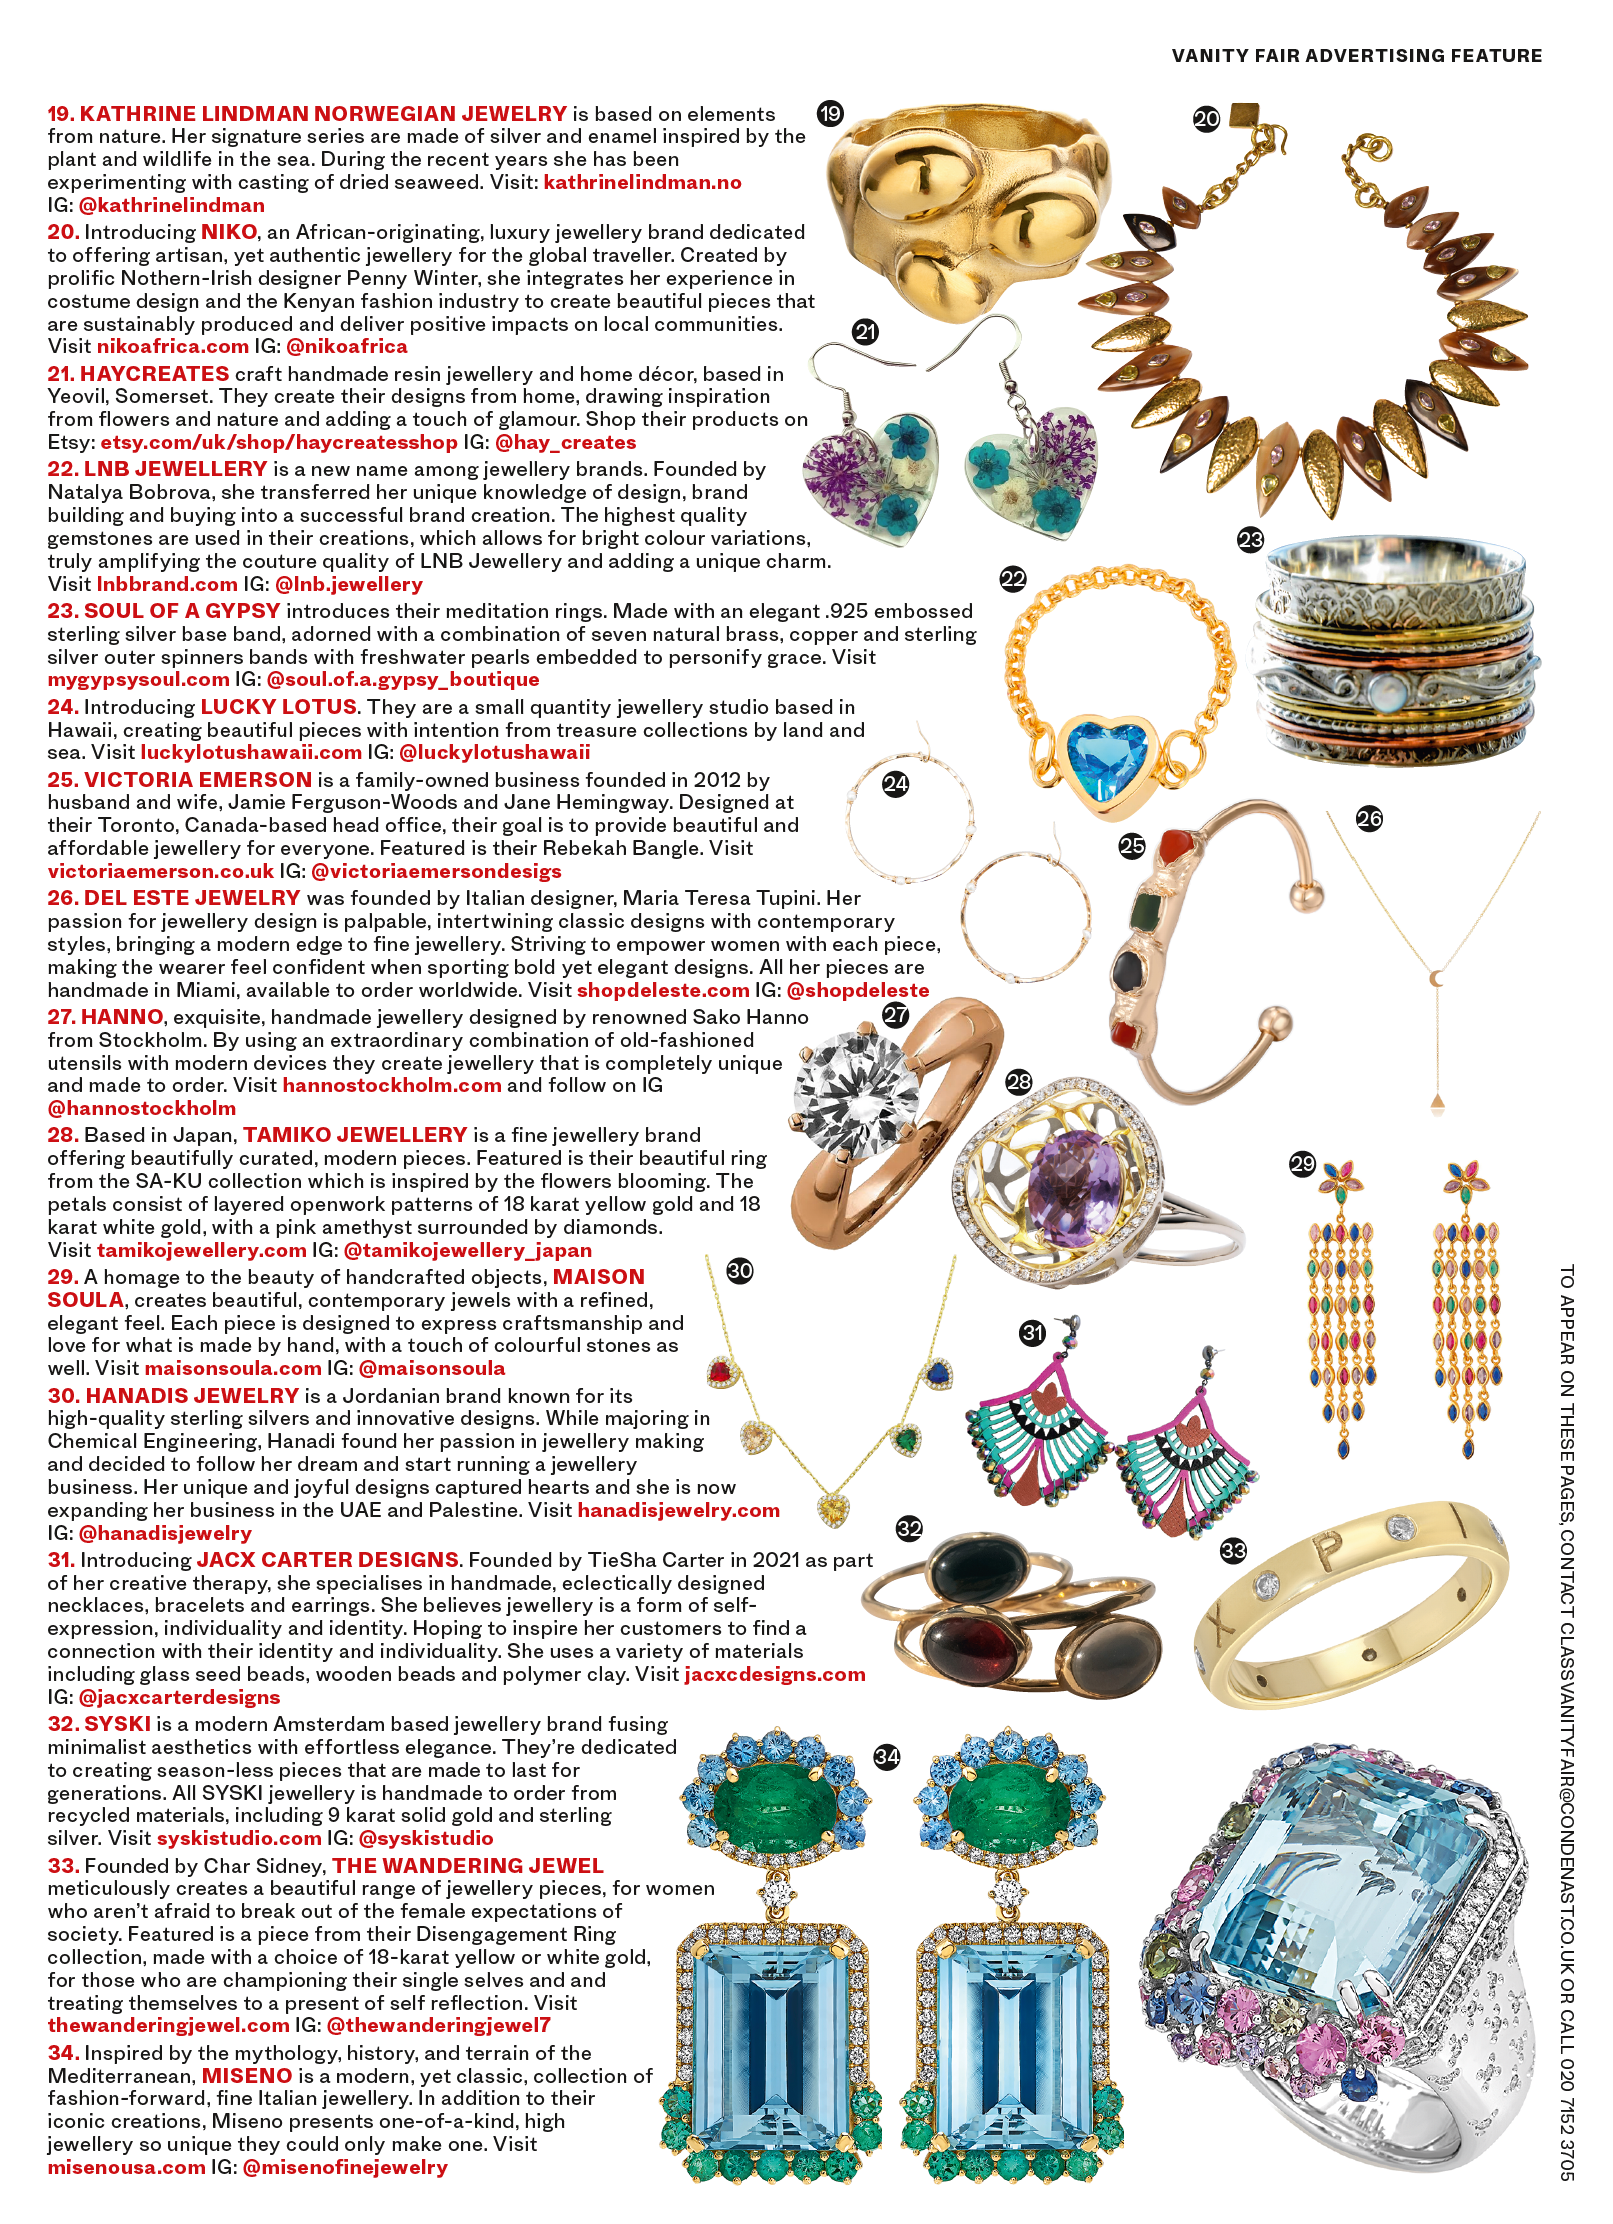 vanity Fair magazine jewelry section featuring the pillbox disengagement Ring from the wandering jewel